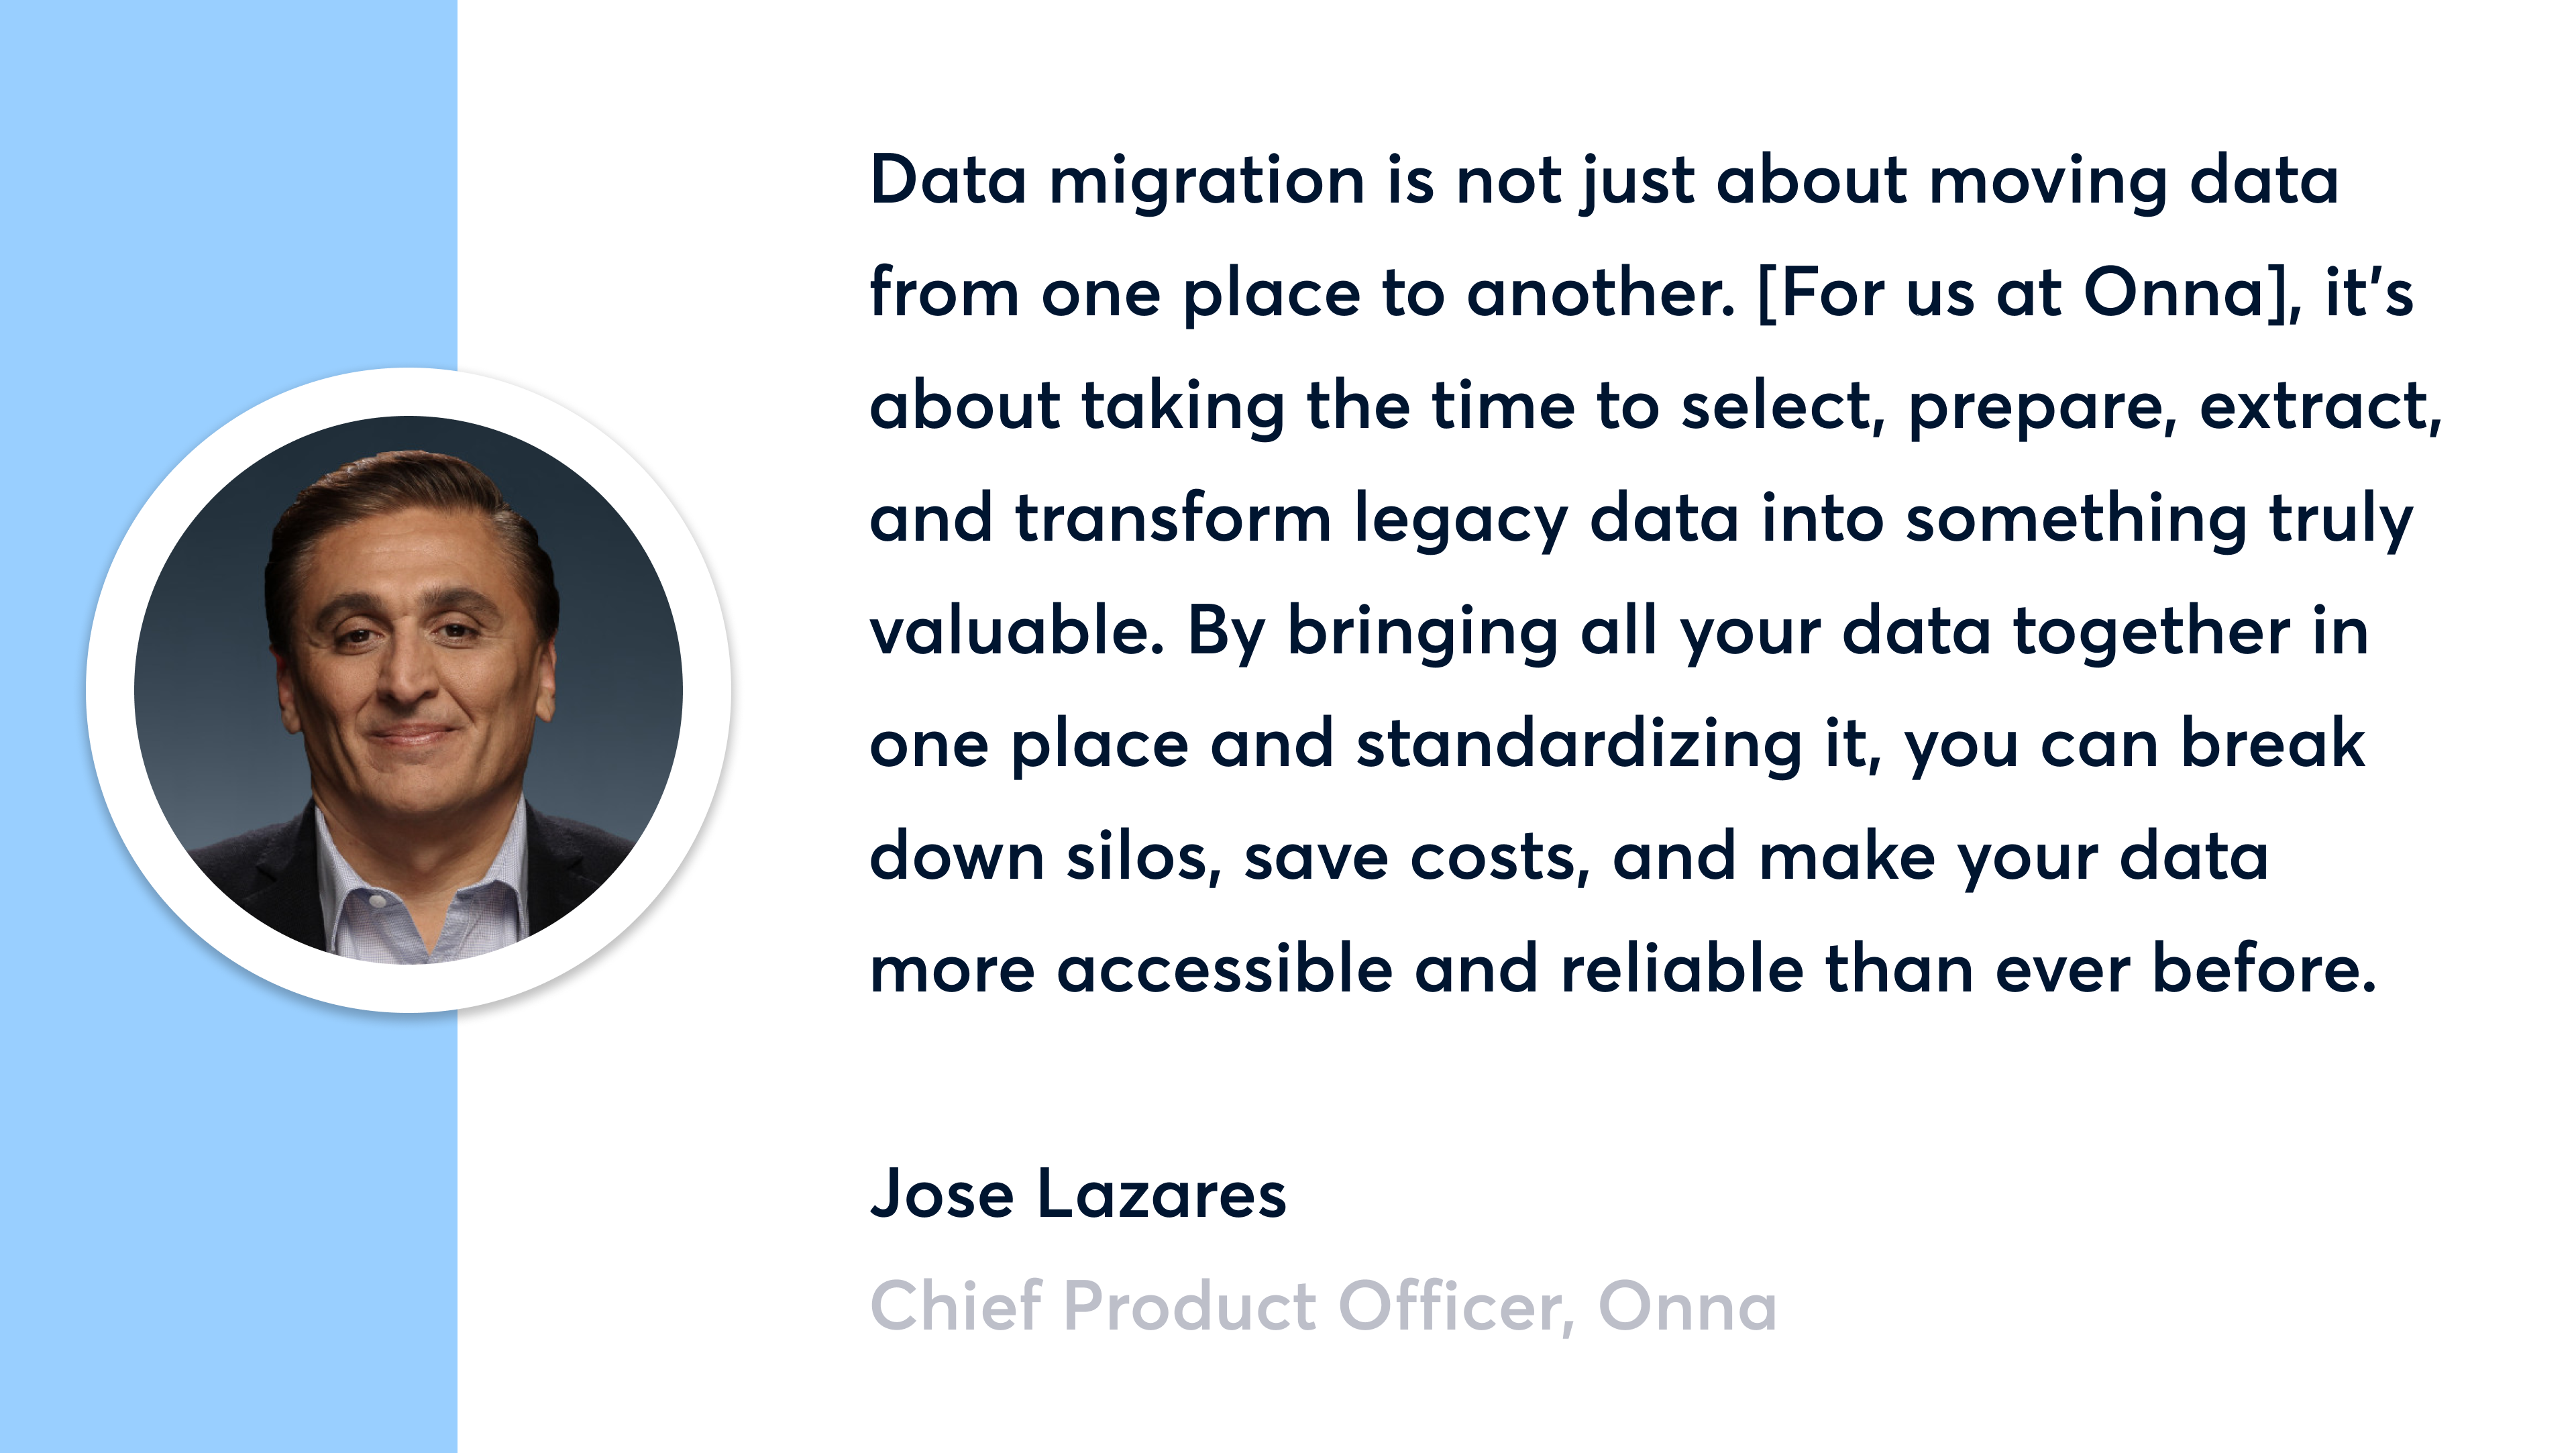 Data migration is not just about moving data from one place to another. [For us at Onna], it's about taking the time to select, prepare, extract, and transform legacy data into something truly valuable. By bringing all your data together in one place and standardizing it, you can break down silos, save costs, and make your data more accessible and reliable than ever before. - Jose Lazares, Chief Product Officer, Onna